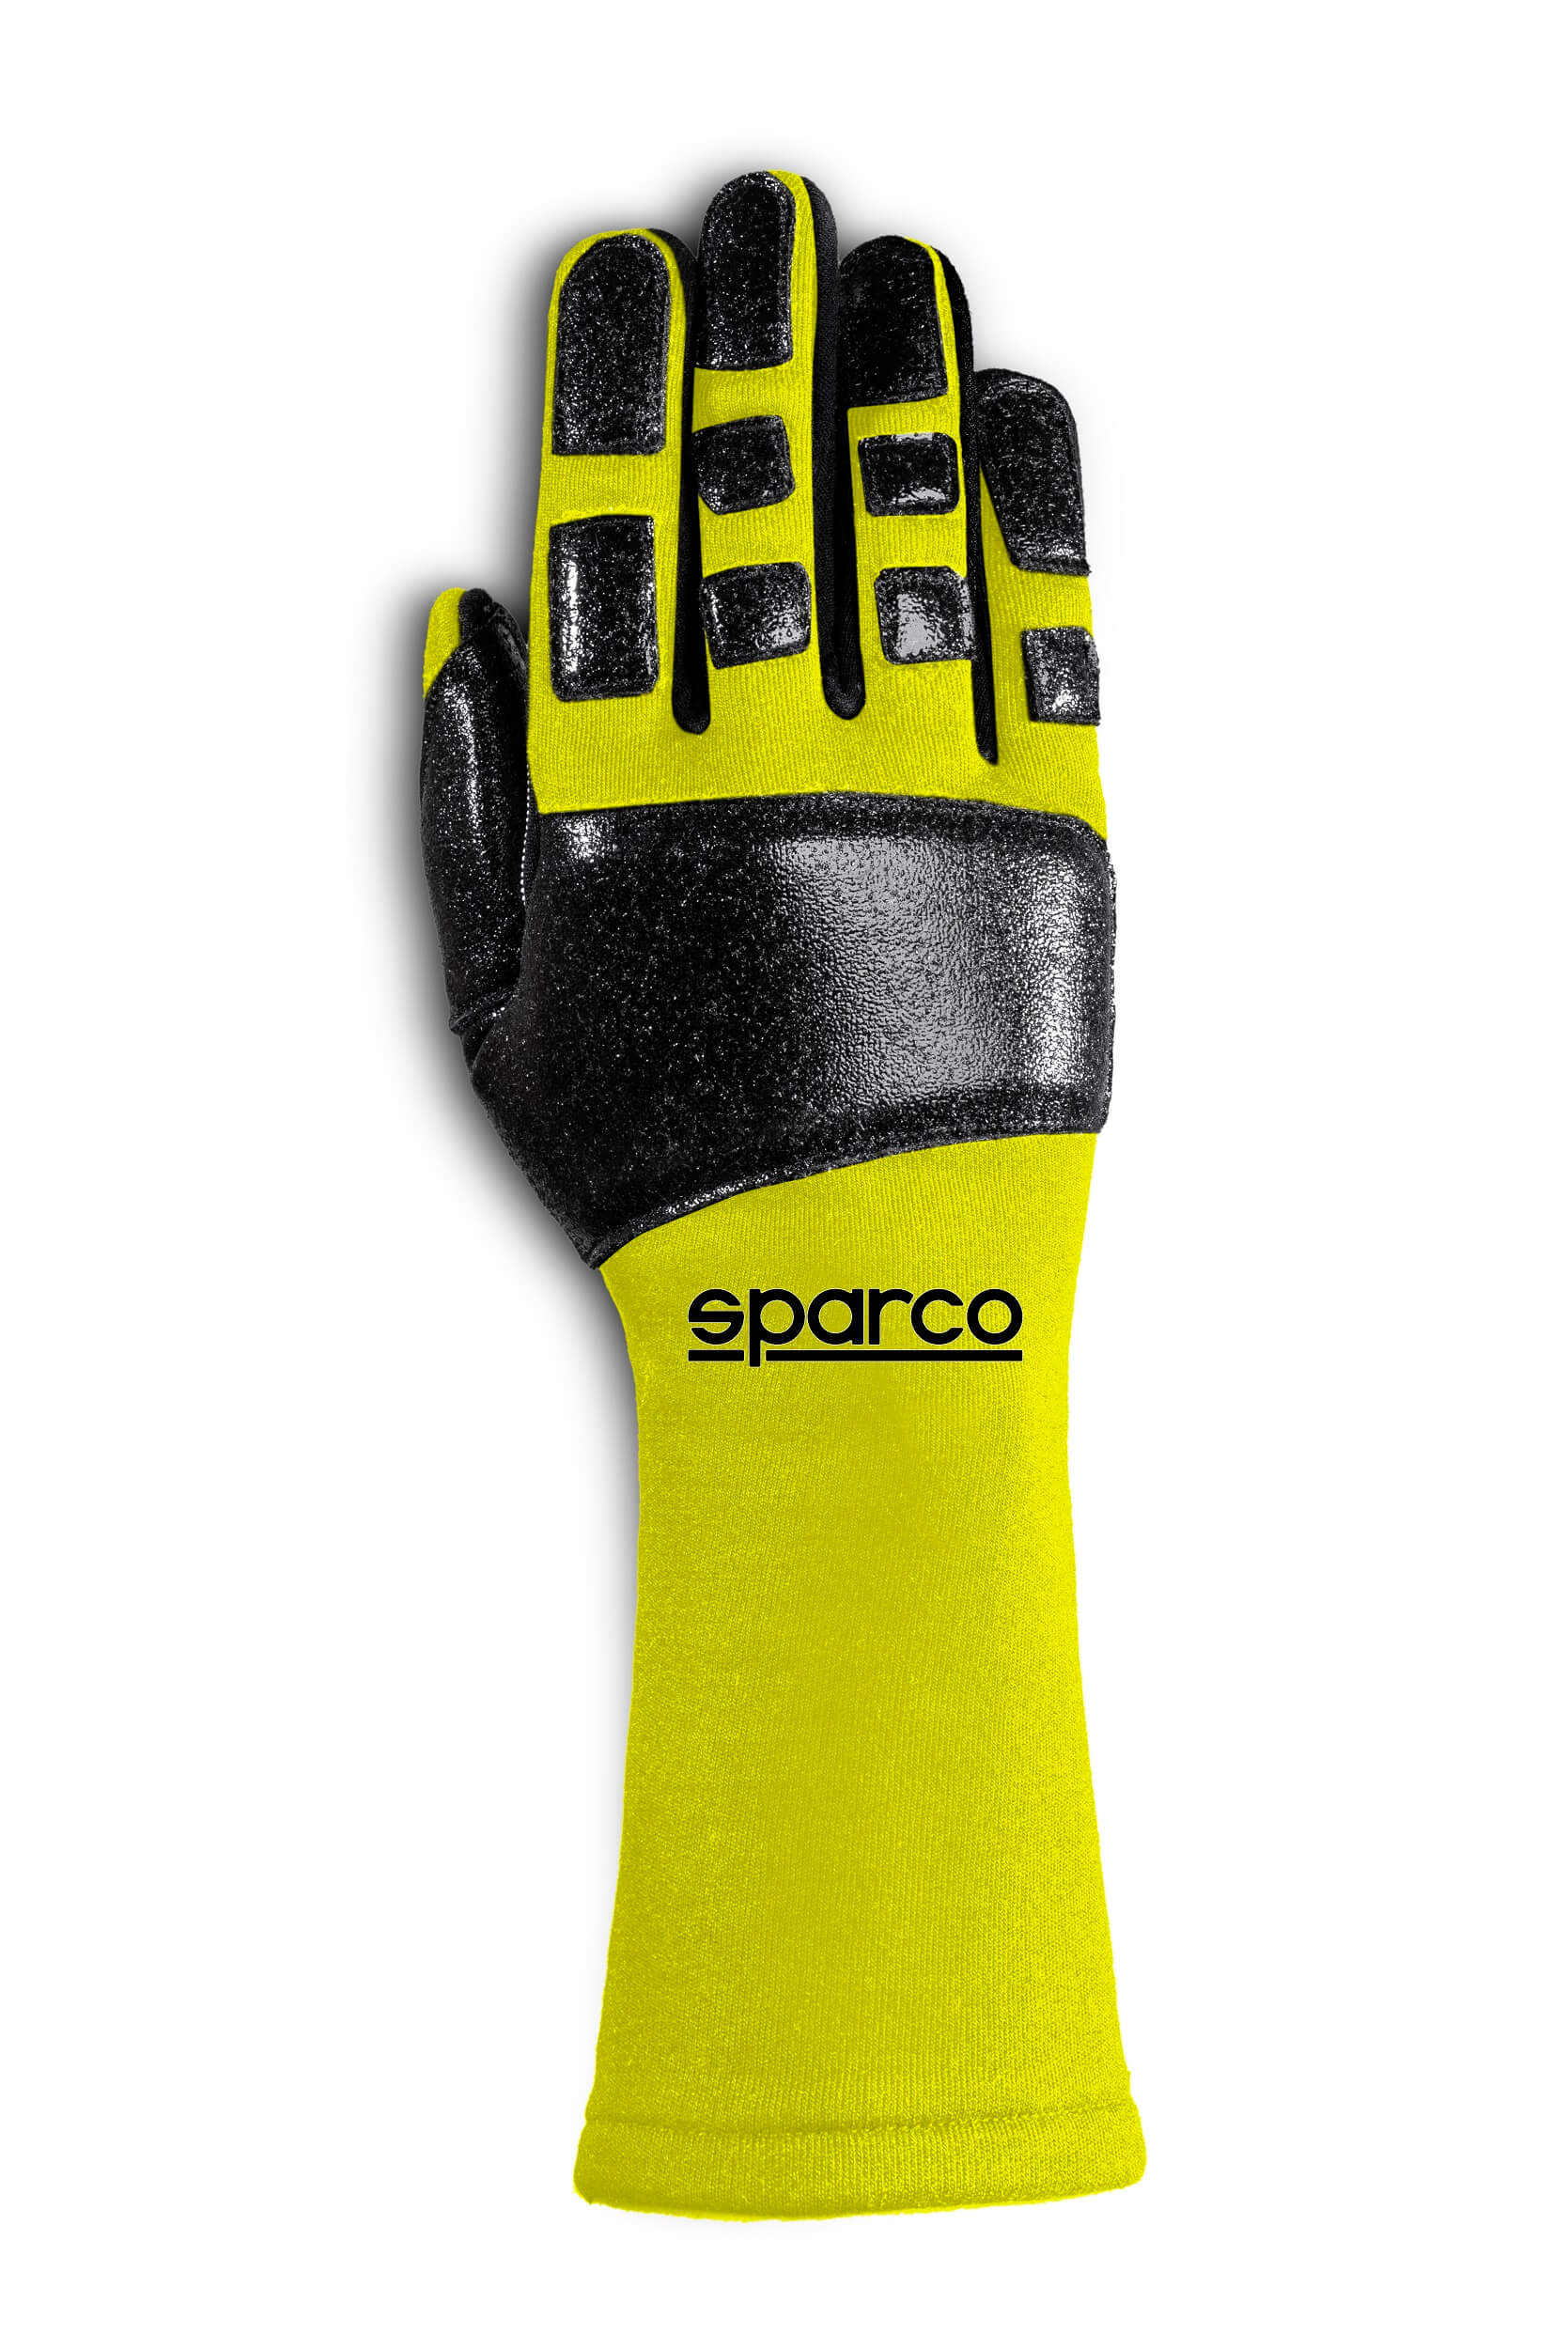 SPARCO 00131808GF TIDE MECA Gloves, NOT FIA, yellow, size 8 Photo-0 